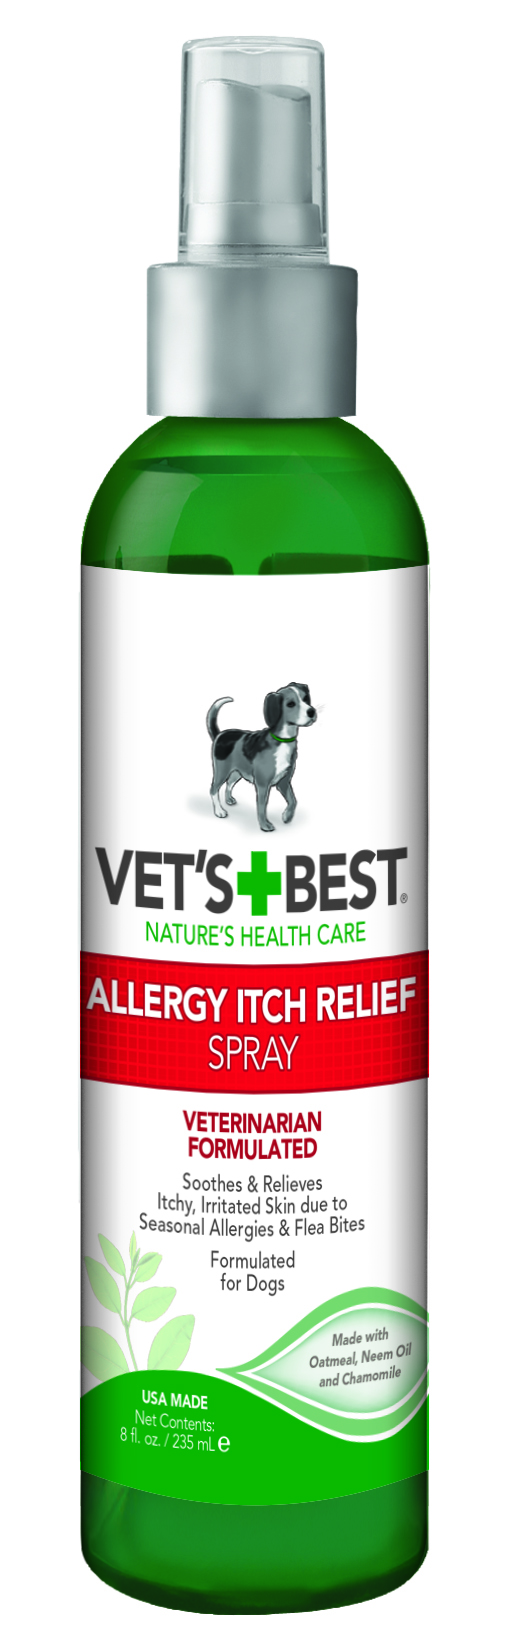 Dog Shampoo For Allergies With Natural Ingredients Vets Best